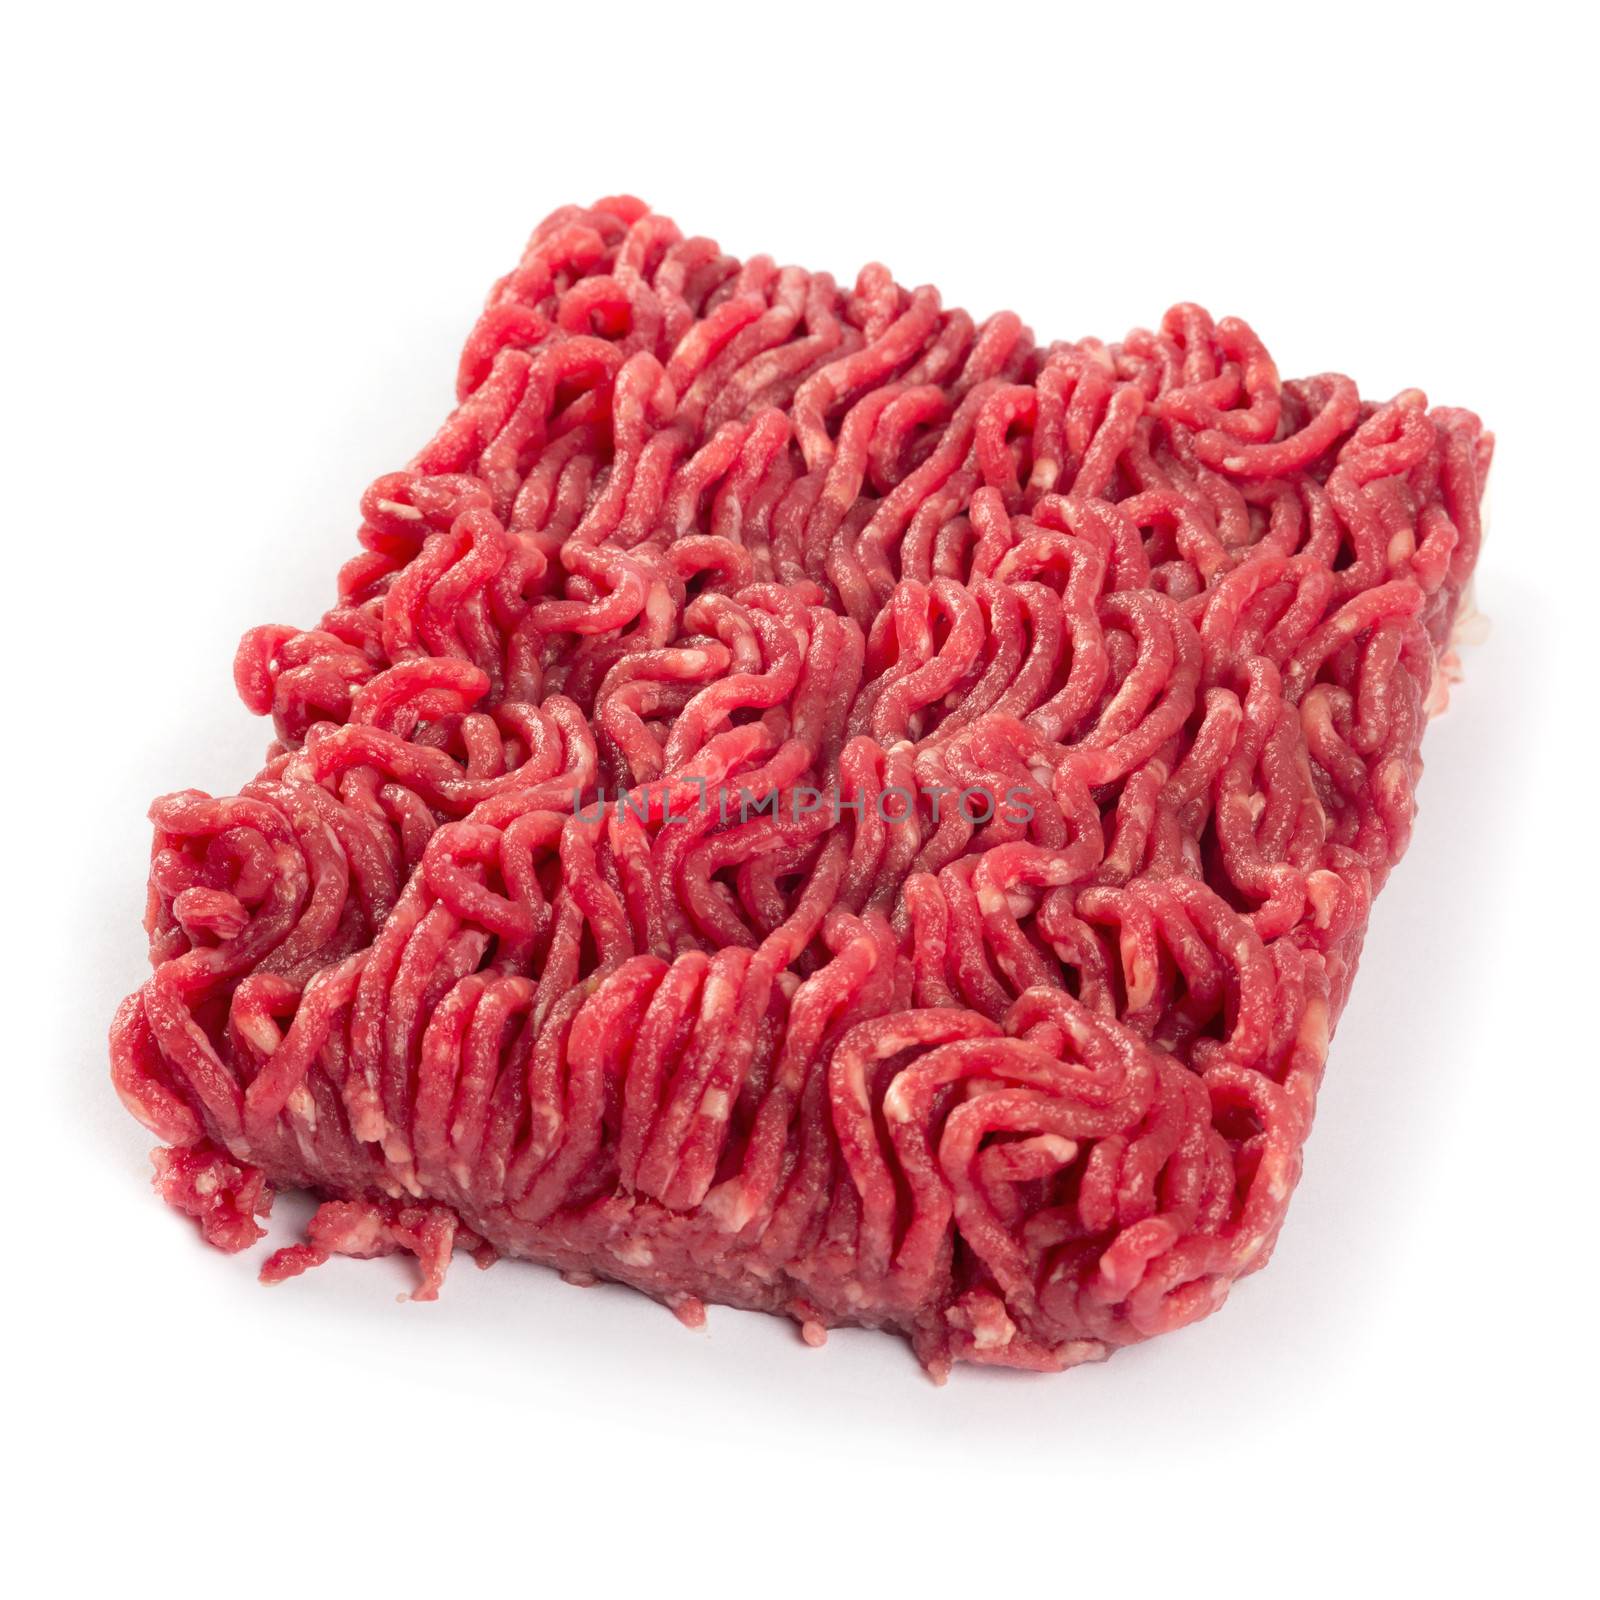 Ground beef by sumners